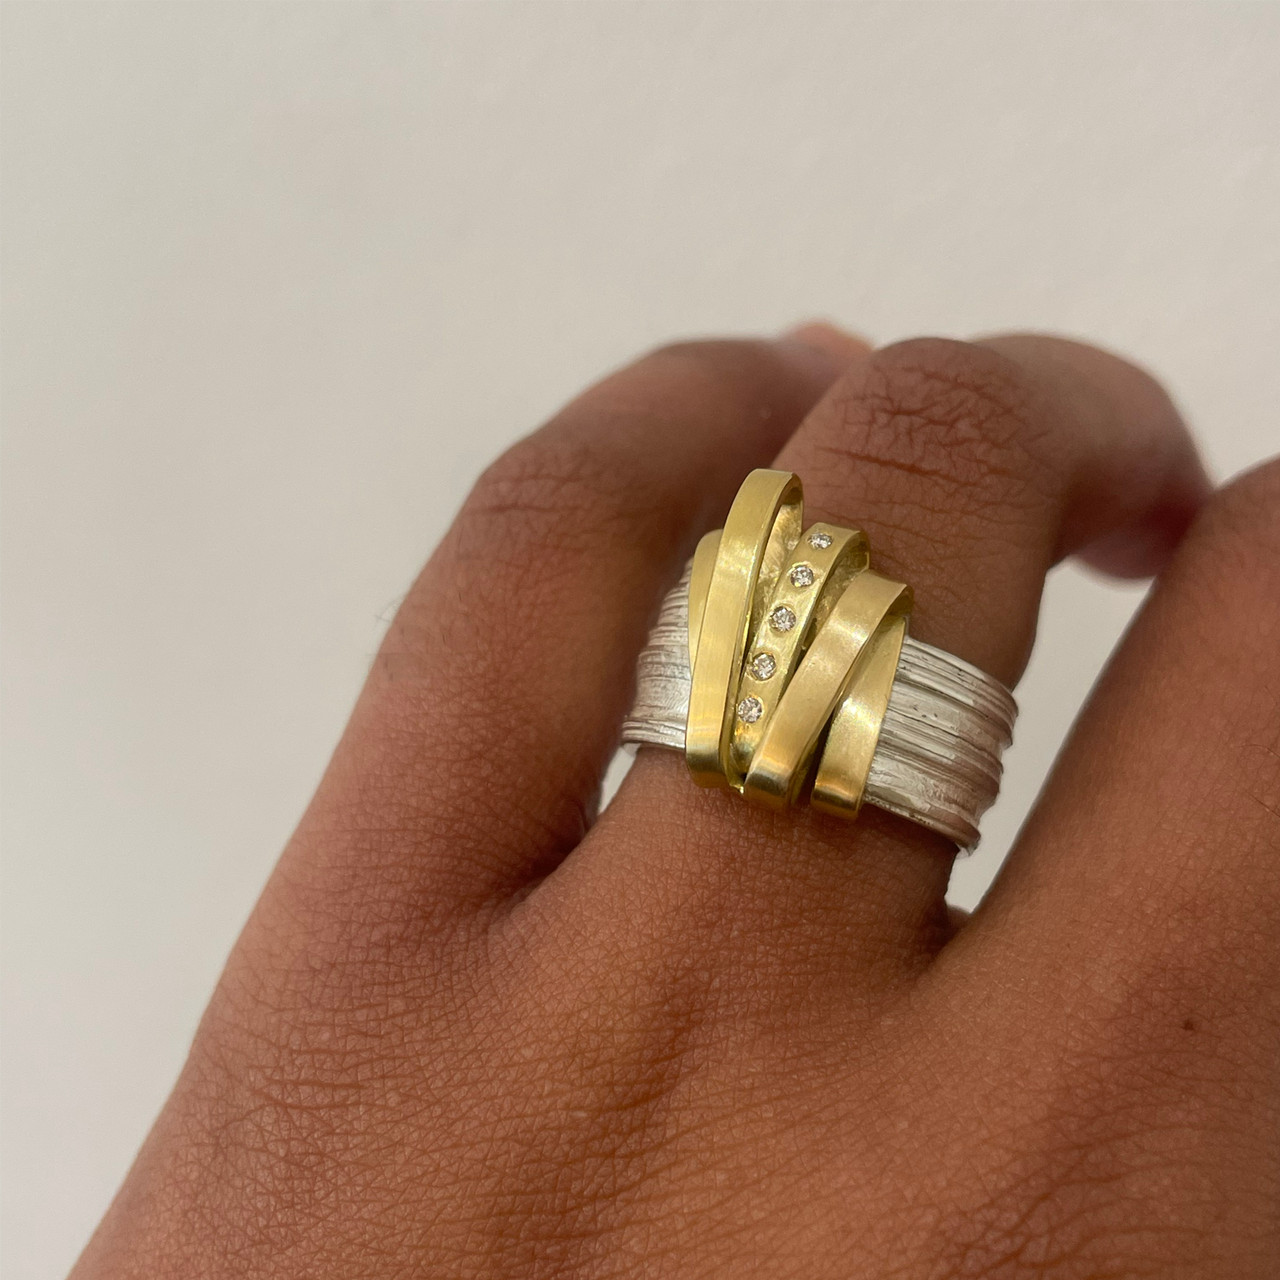 Gold Ribbon Art Ring by Marion Lebouteiller available at tomfoolery London as a part of Art Ring 2023 exhibition.